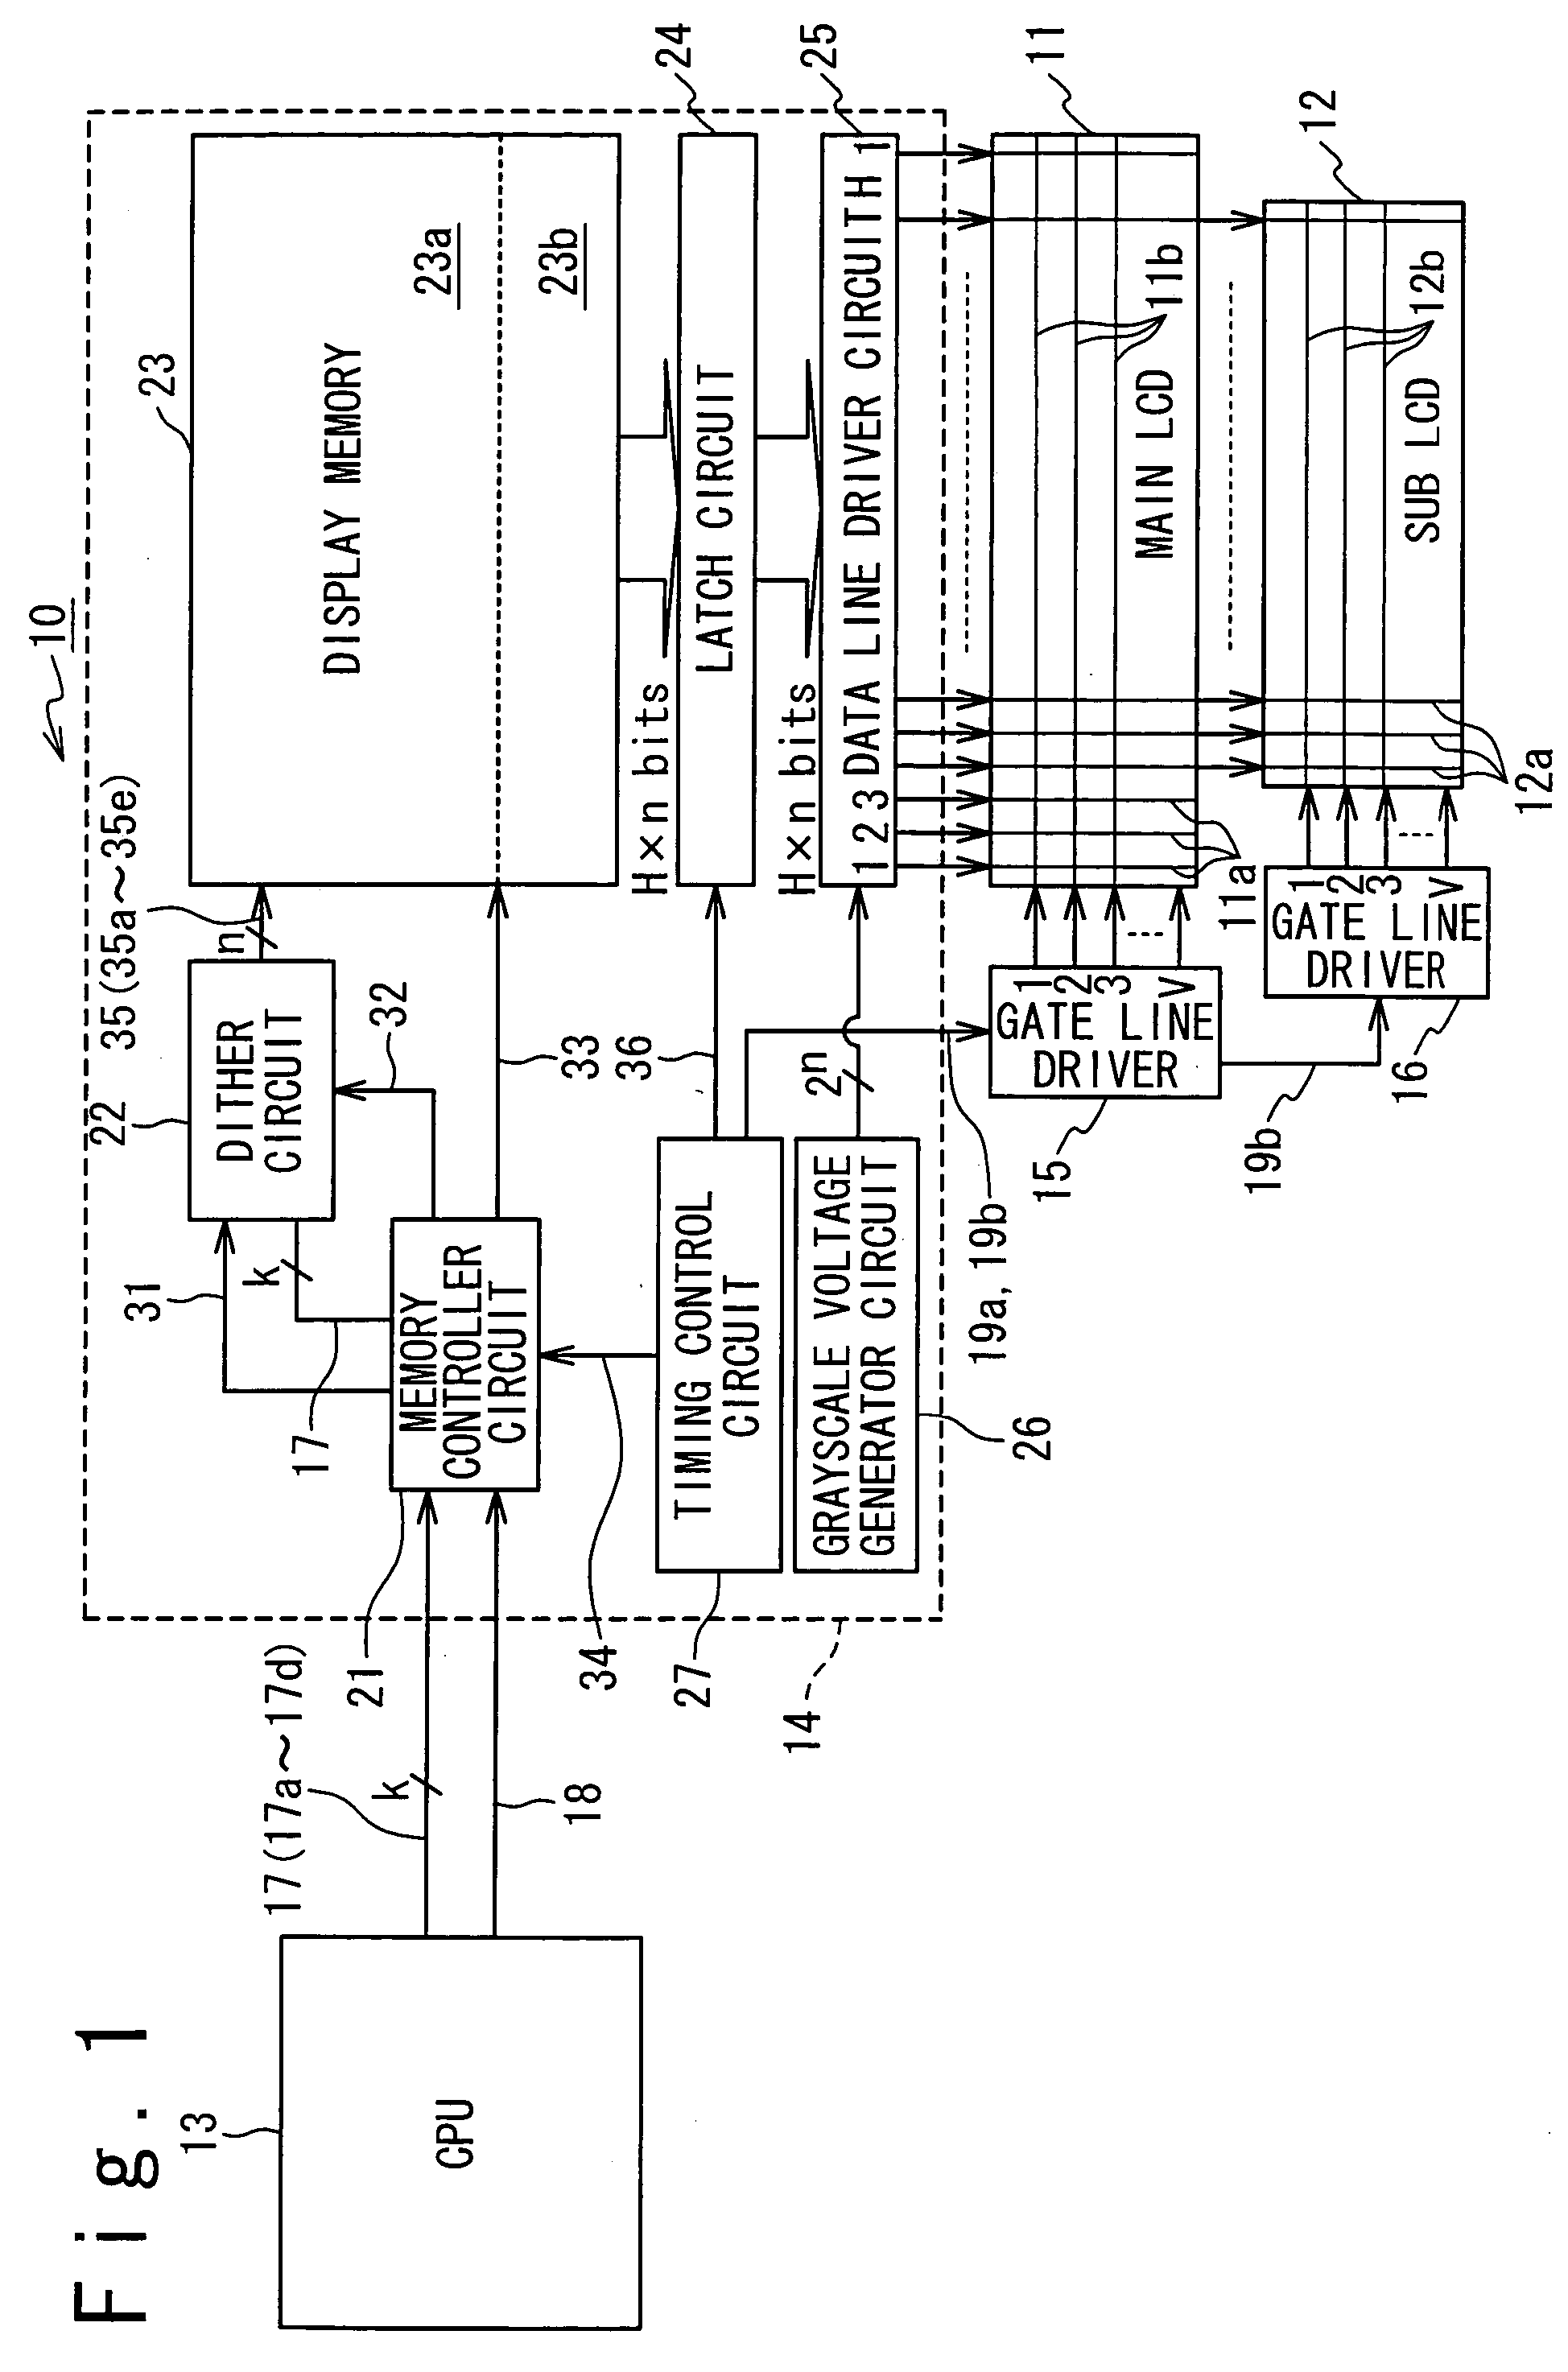 Controller/driver for driving display panel